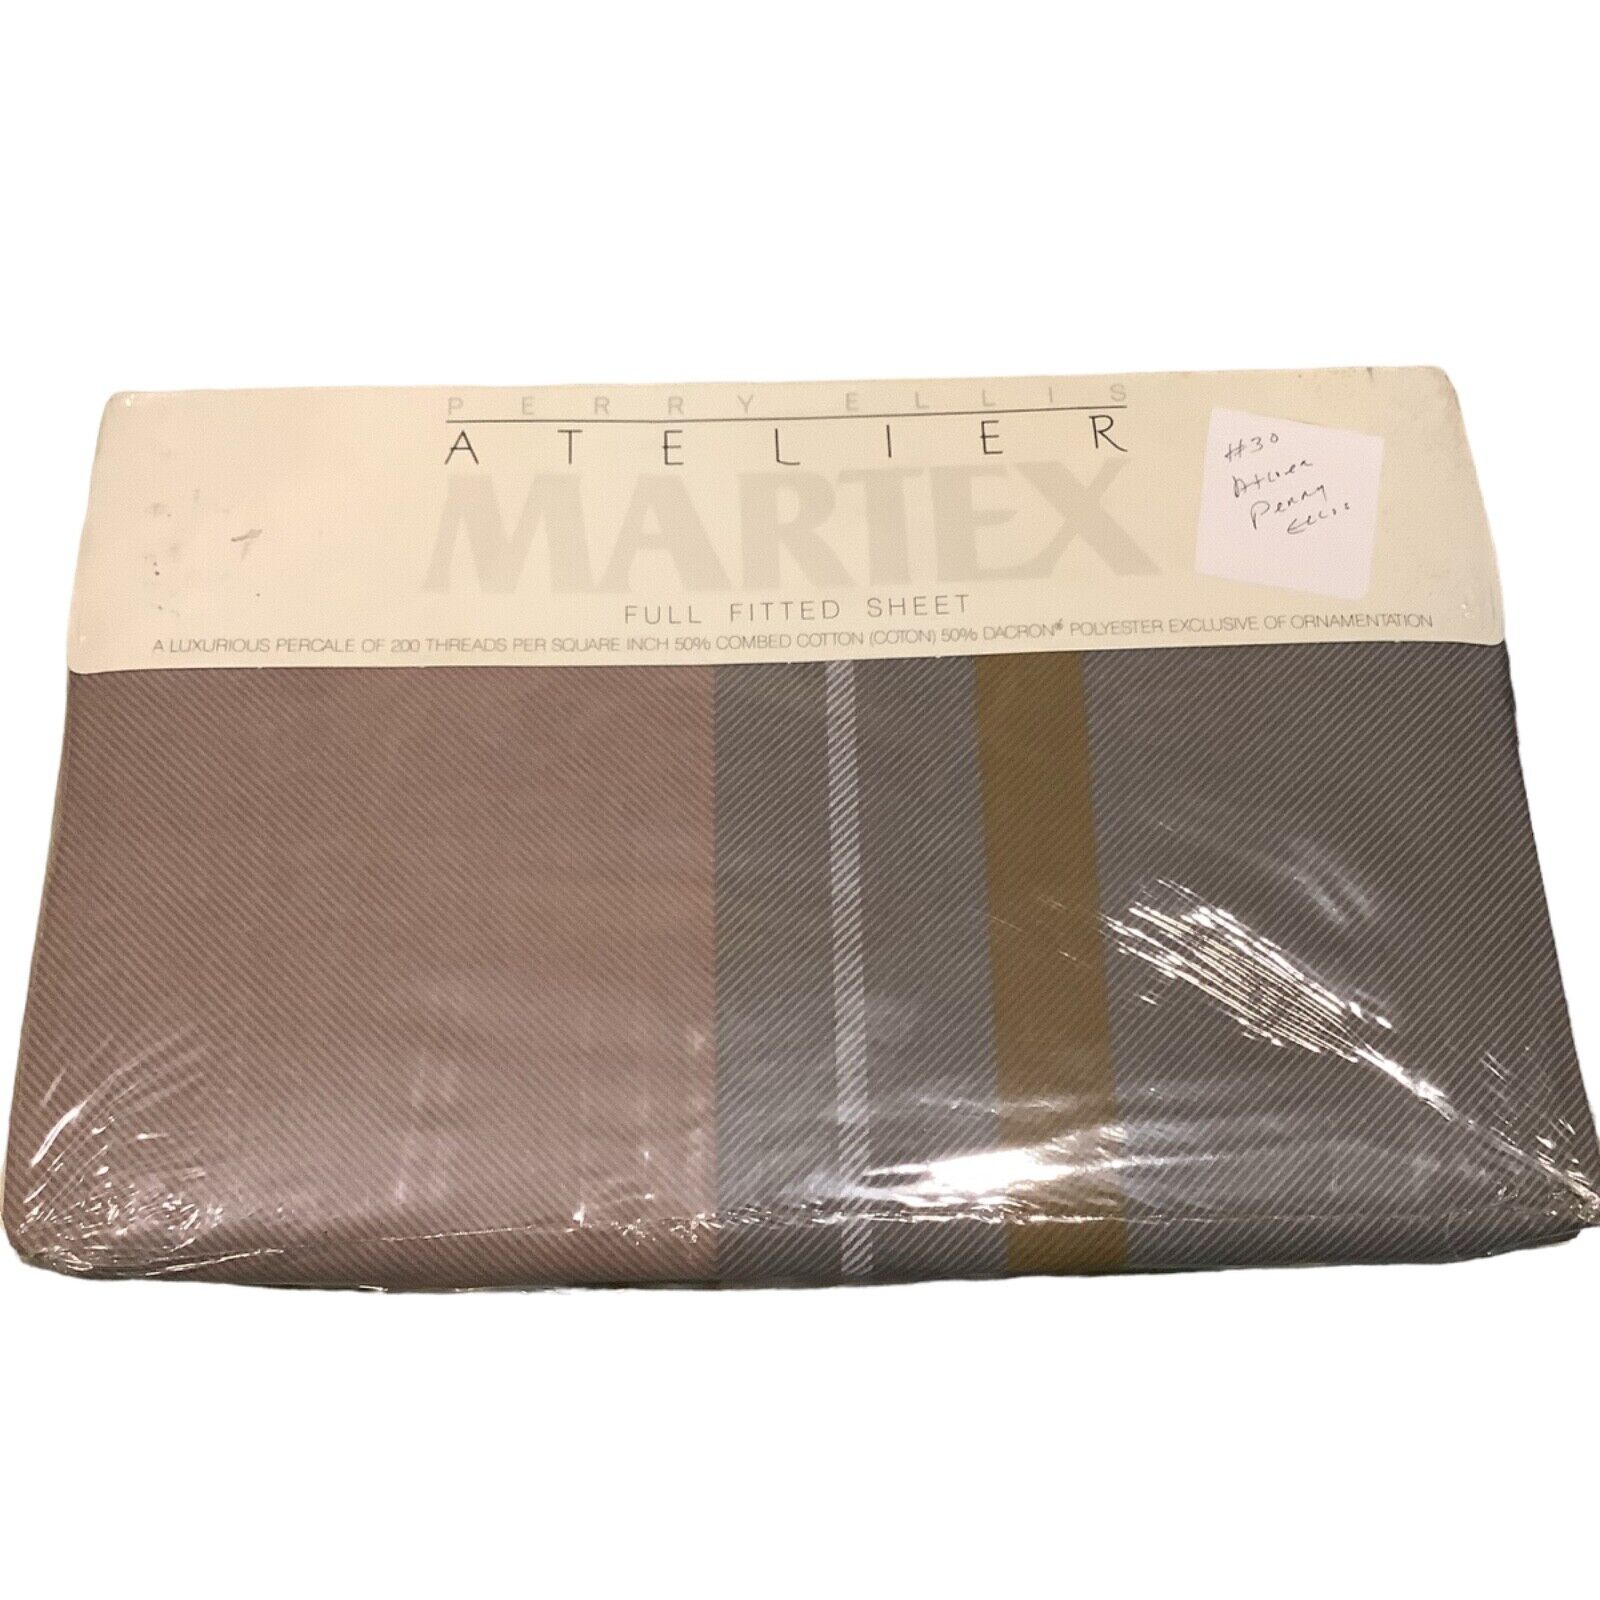 Vintage Perry Ellis Atelier Full Size Fitted Sheet Sutton Square NEW IN PACKAGE